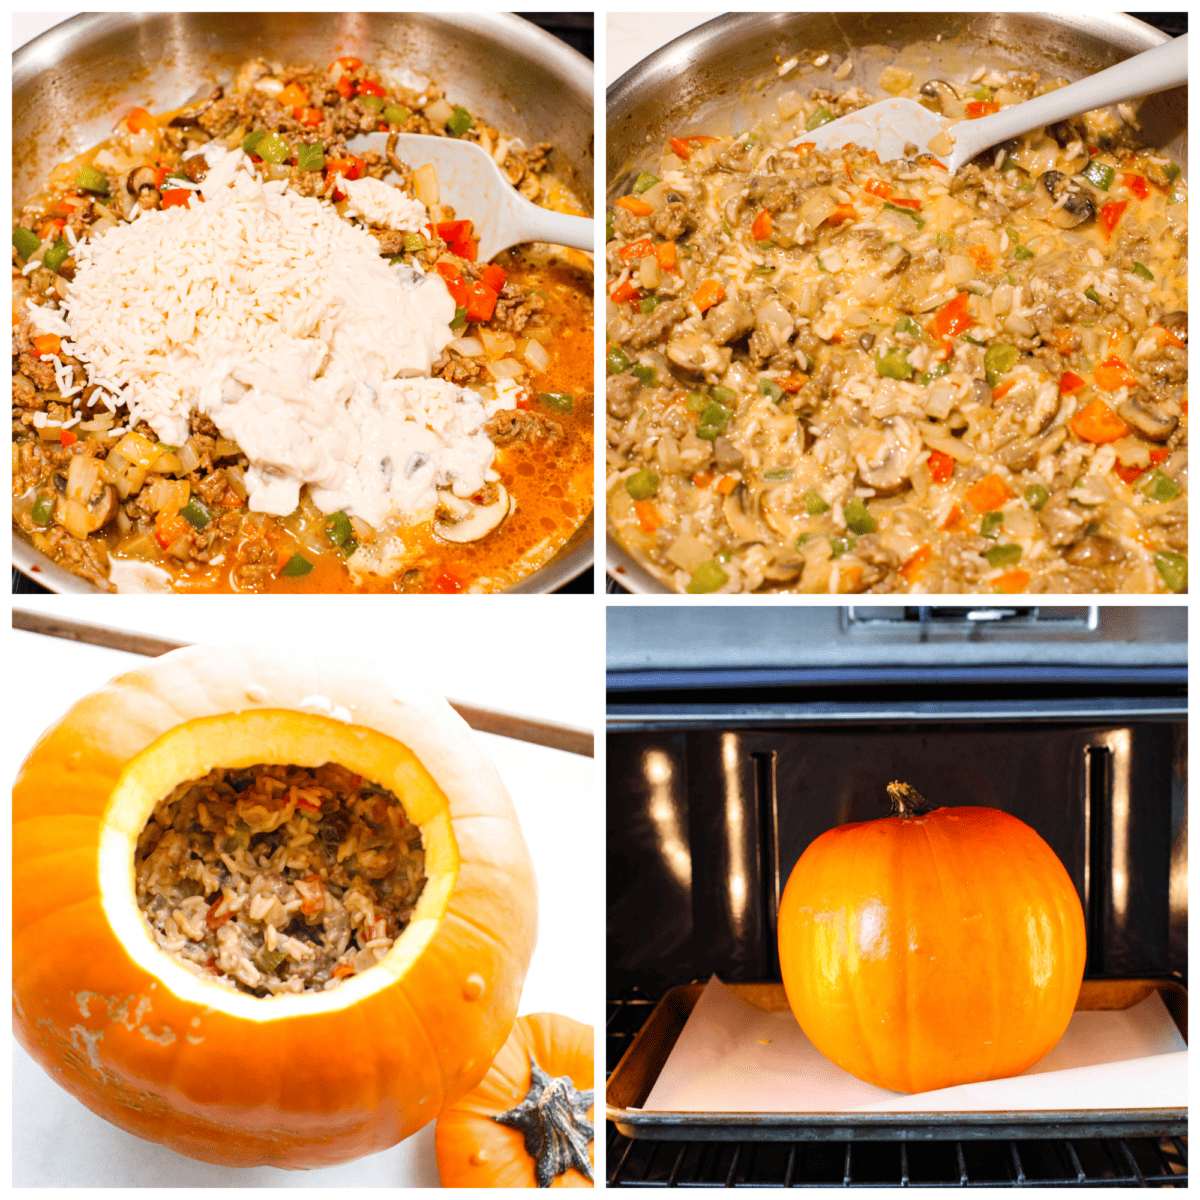 4-photo collage of the rice and sausage mixture being prepared, added to the pumpkin shell, and then baked.